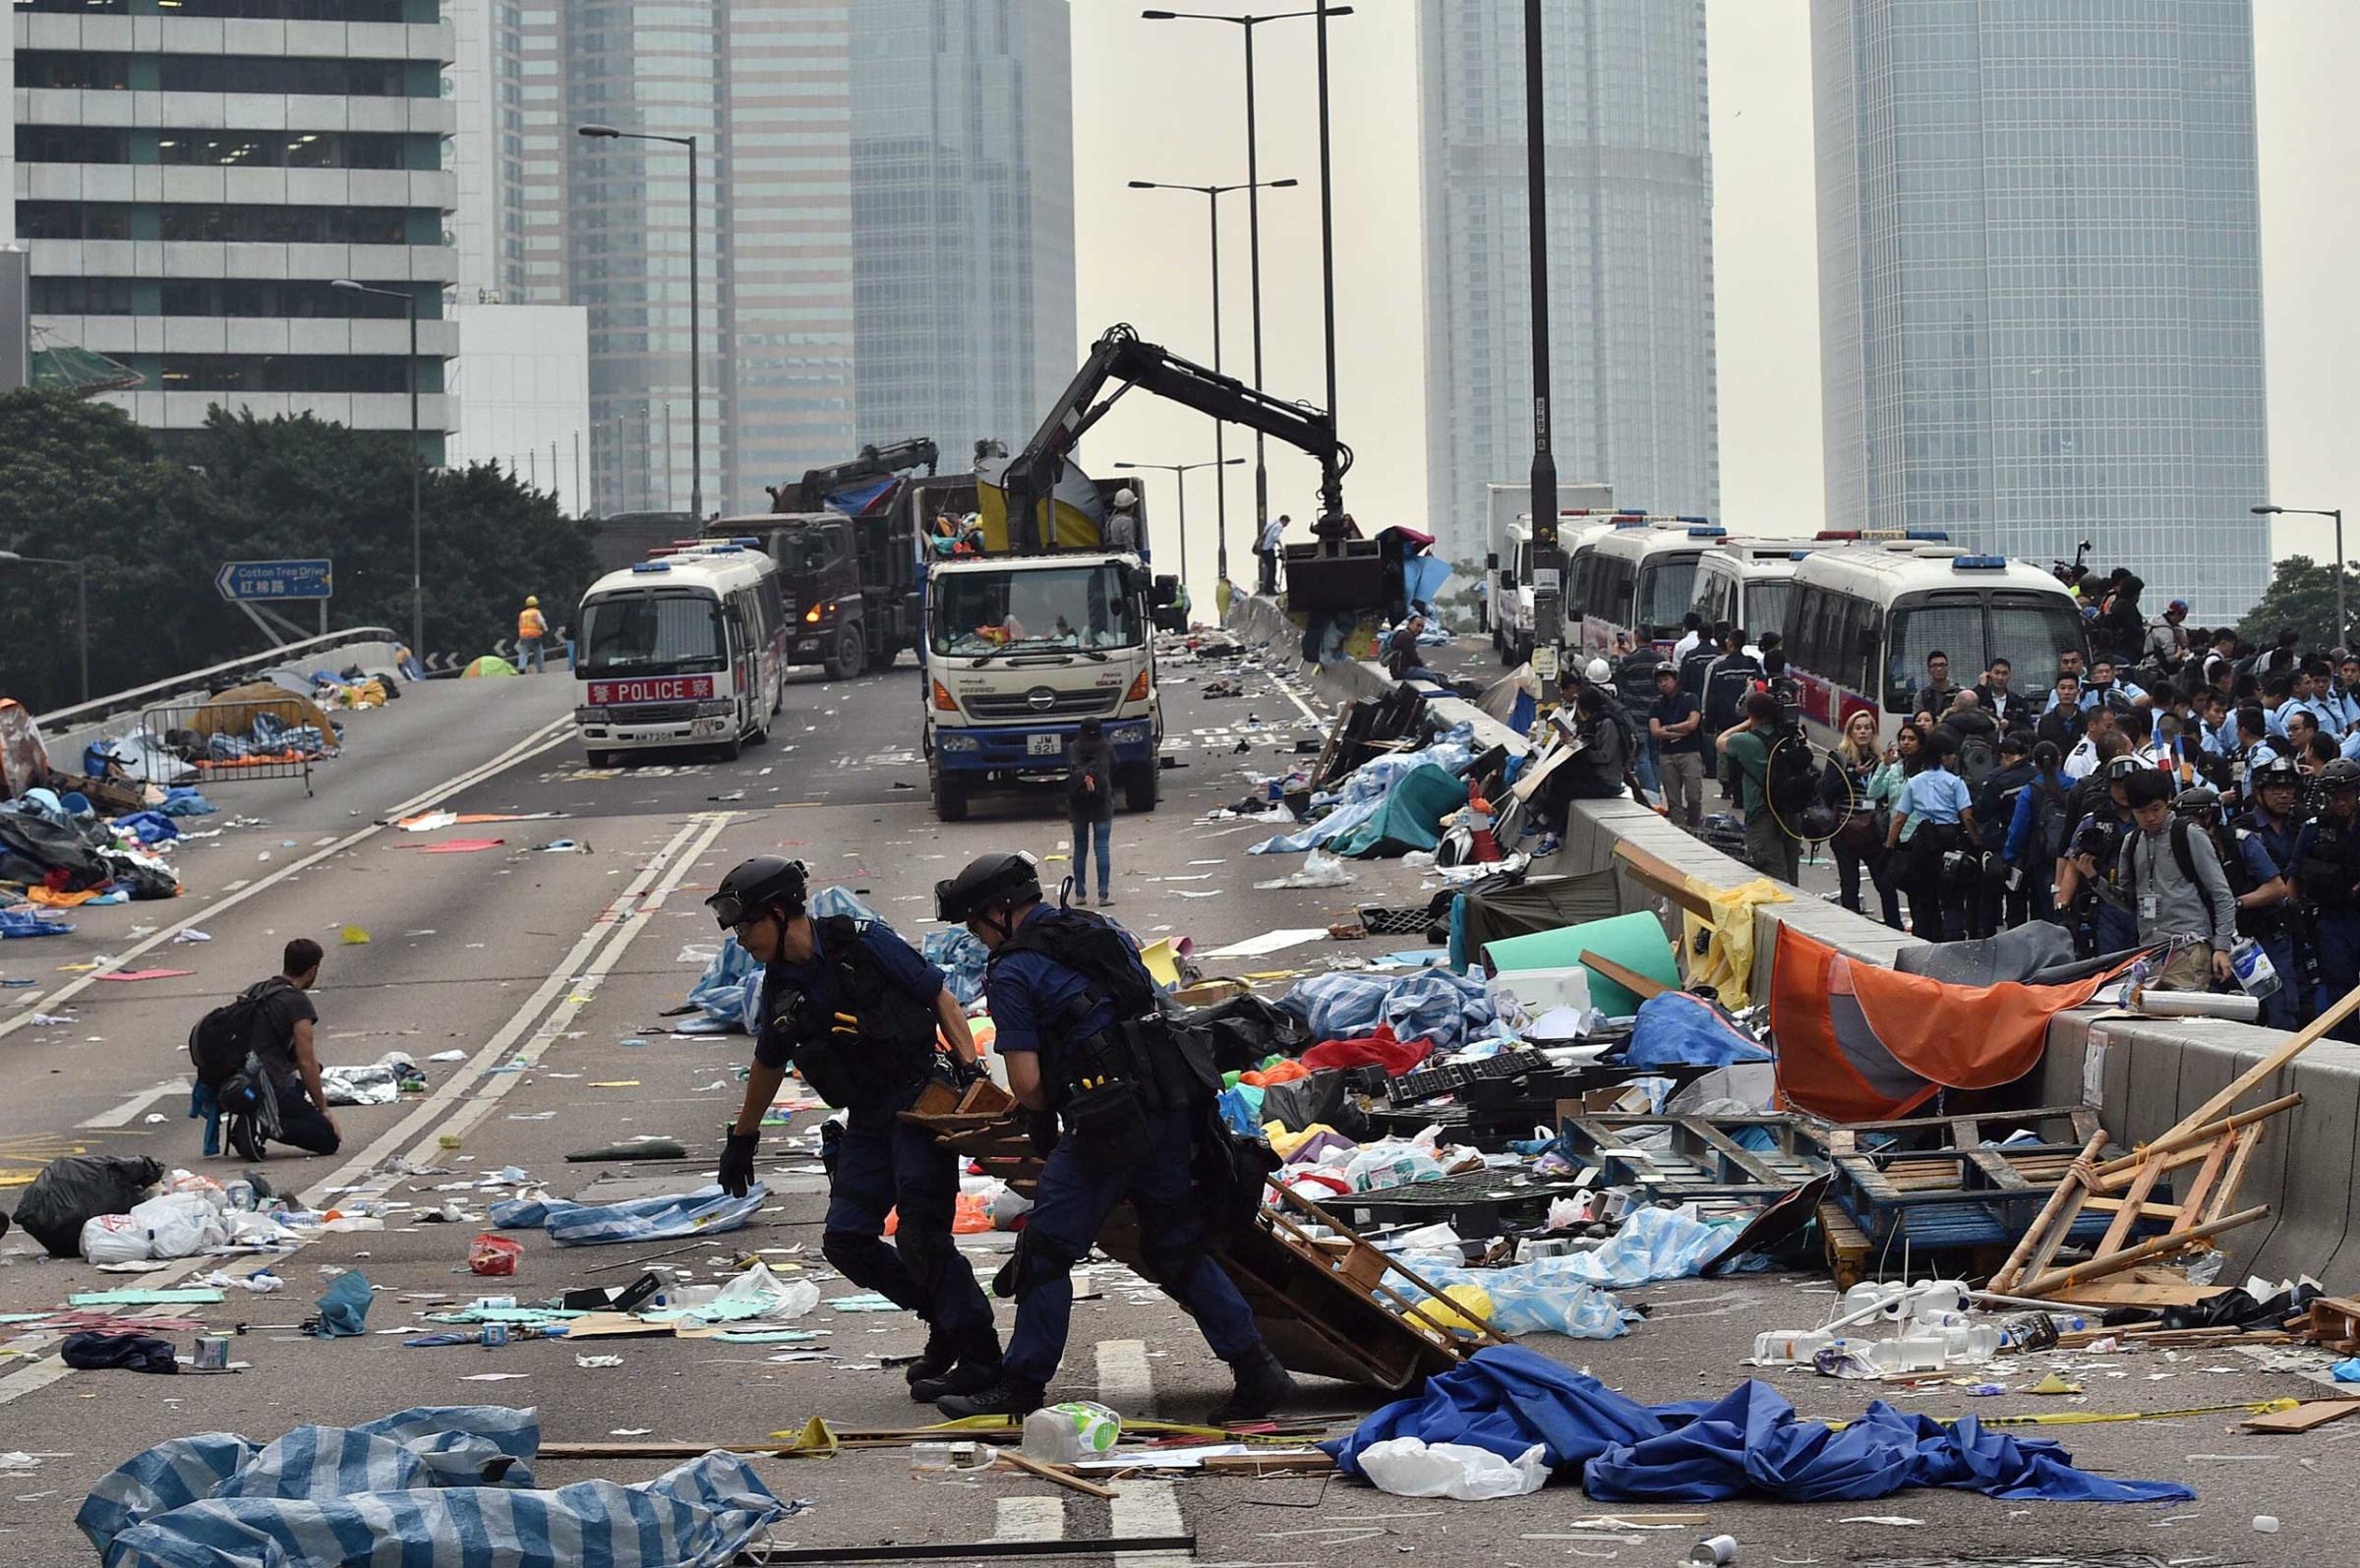 Hong Kong police dismantle the remains of the pro-democracy protest camp in the Admiralty district of Hong Kong on Dec. 11, 2014.